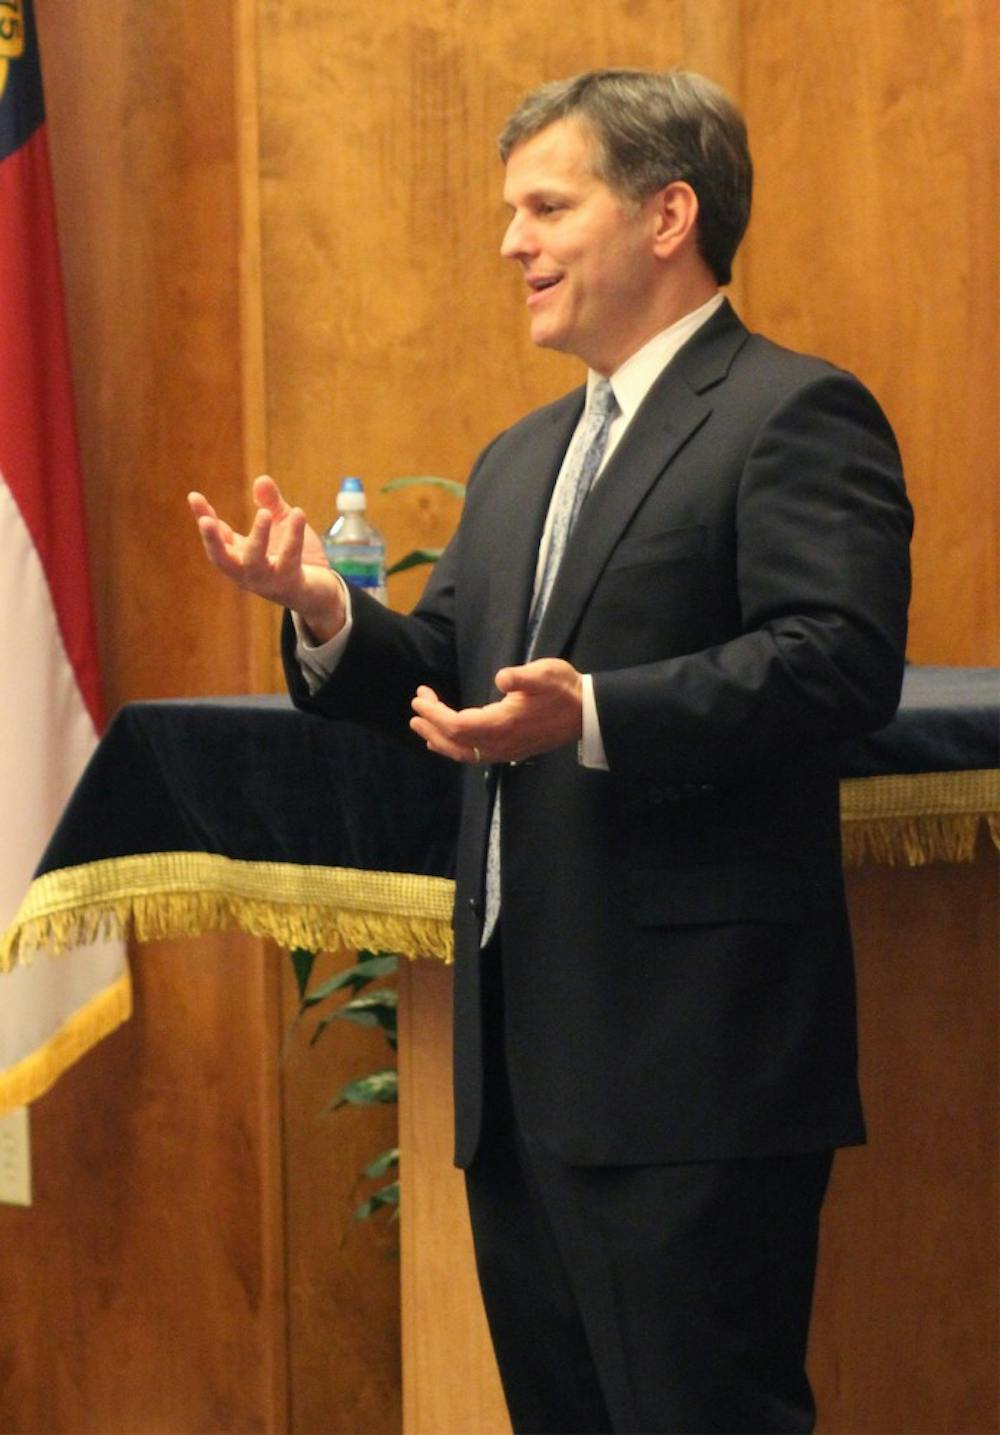 UNC Hillel and the Education Committee hosted Senator Josh Stein, a leading North Carolina Politician to speak about being Jewish in the North Carolina political scene. 

"The way we are going to succeed is having an educated workforce."